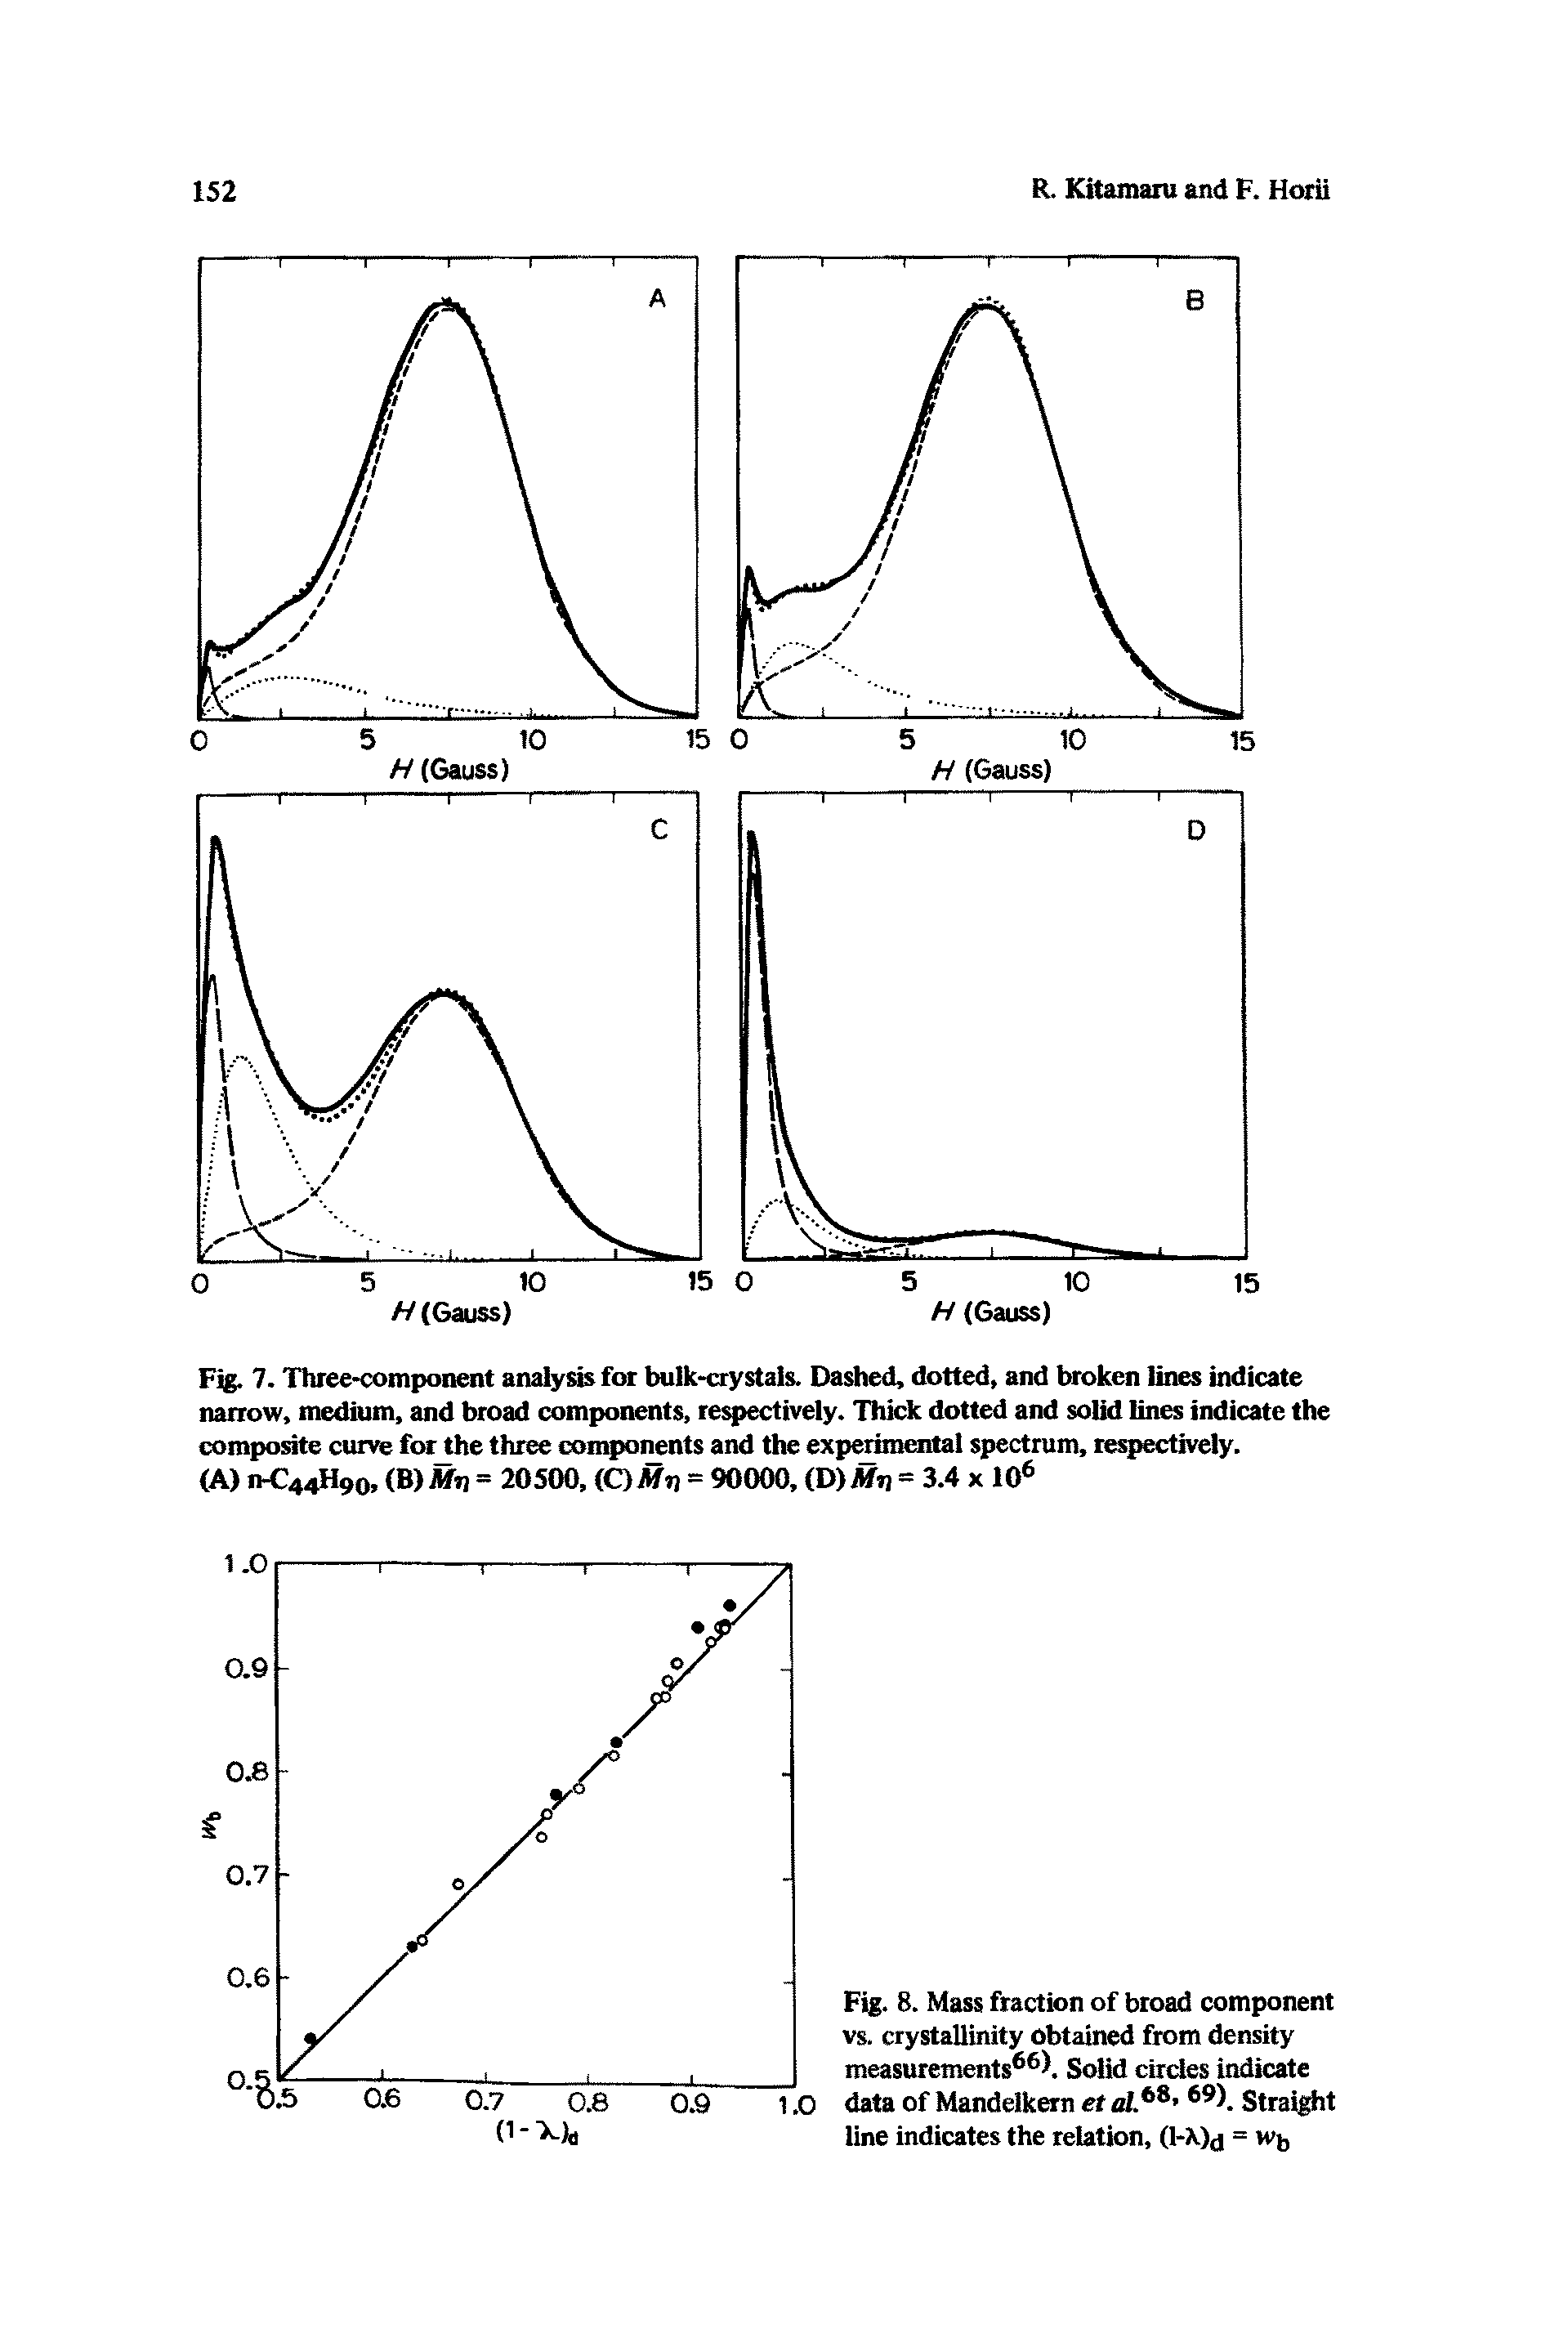 Fig. 7. Three-component analysis for bulk-crystals. Dashed, dotted, and broken lines indicate narrow, medium, and broad components, respectively. Thick dotted and solid lines indicate the composite curve for the three components and the experimental spectrum, respectively.